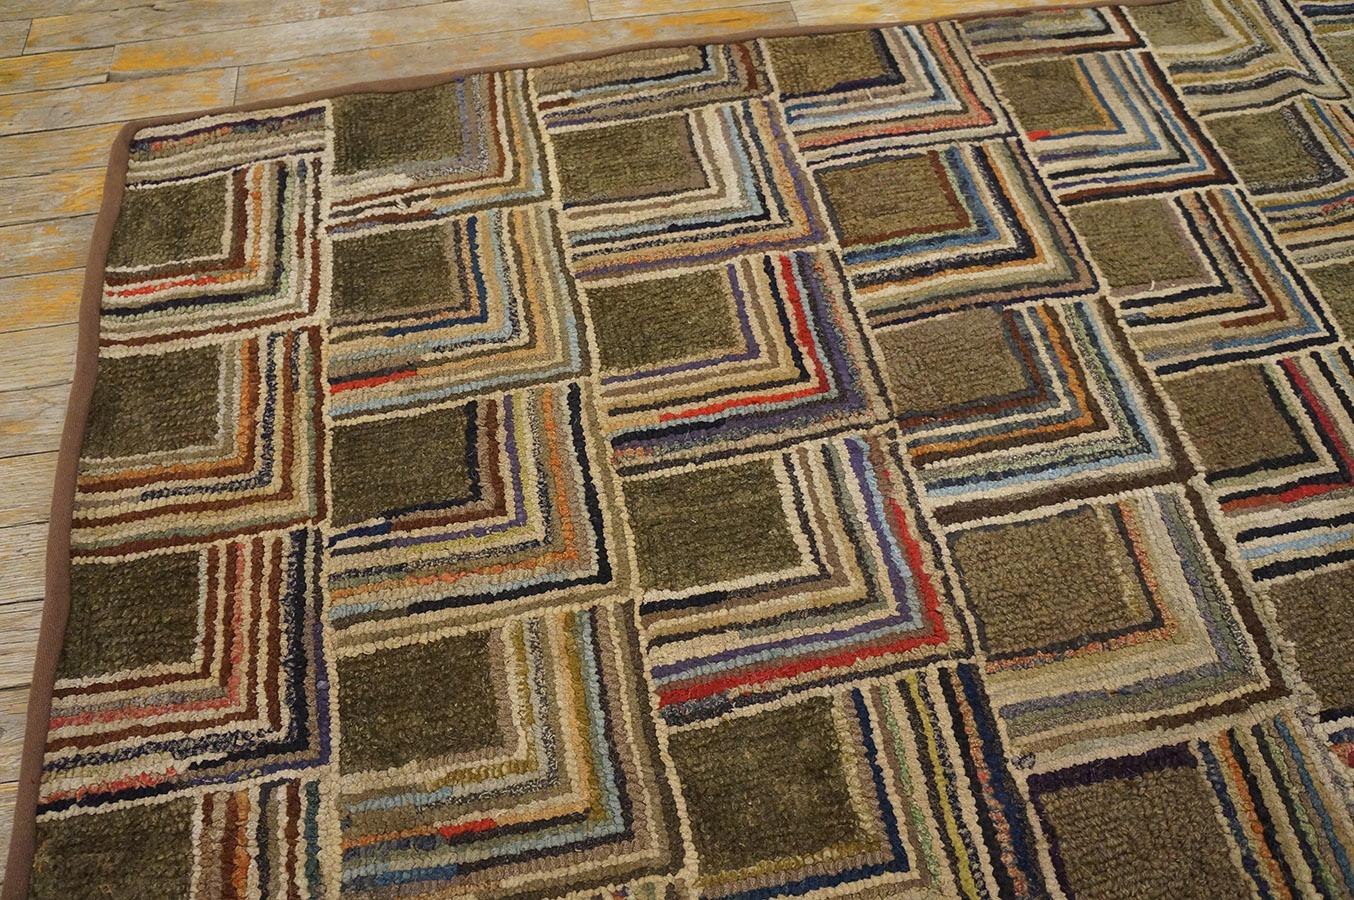 Early 20th Century American Hooked Rug ( 4'8